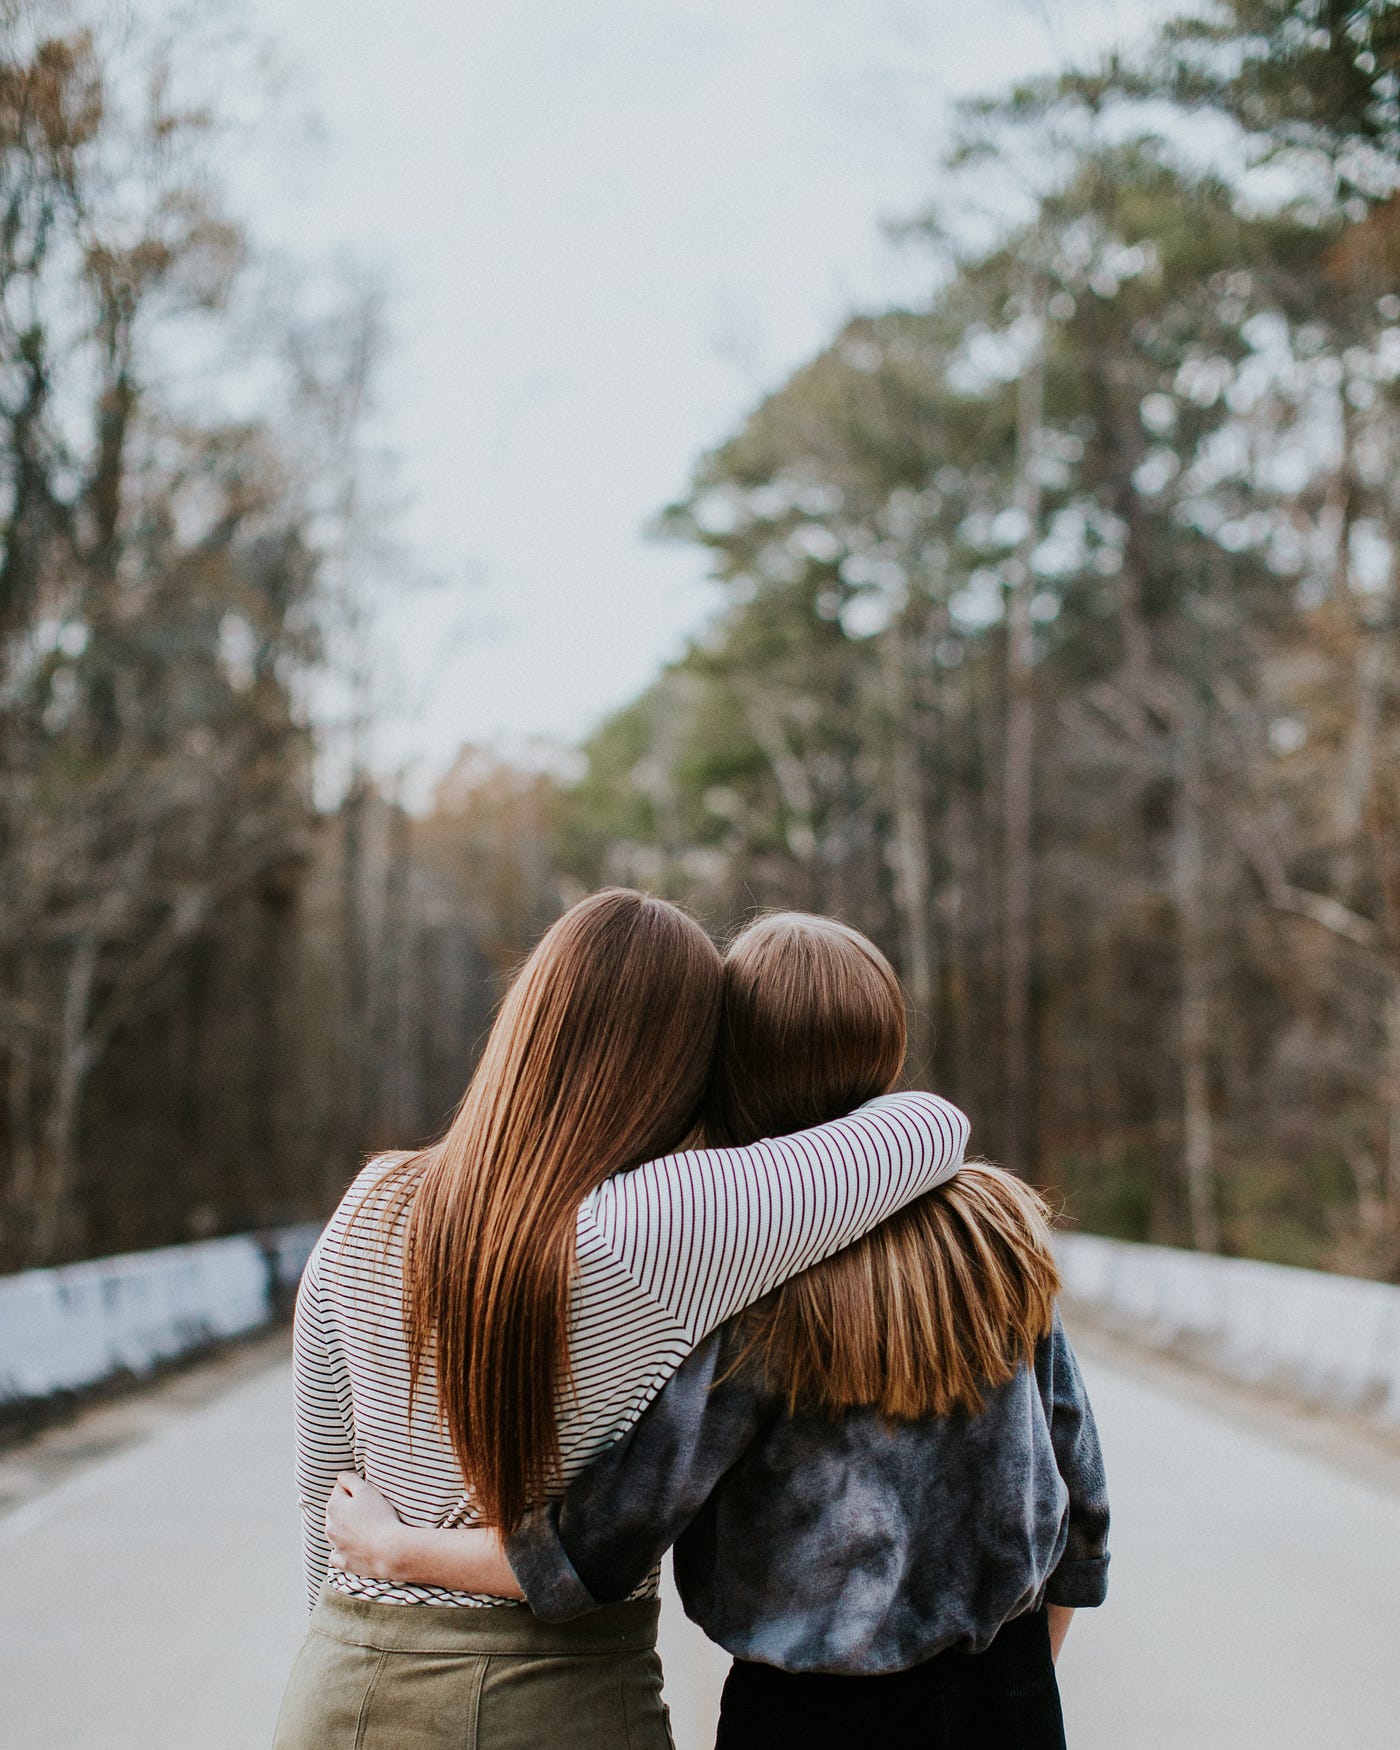 Two girls hugging each other.